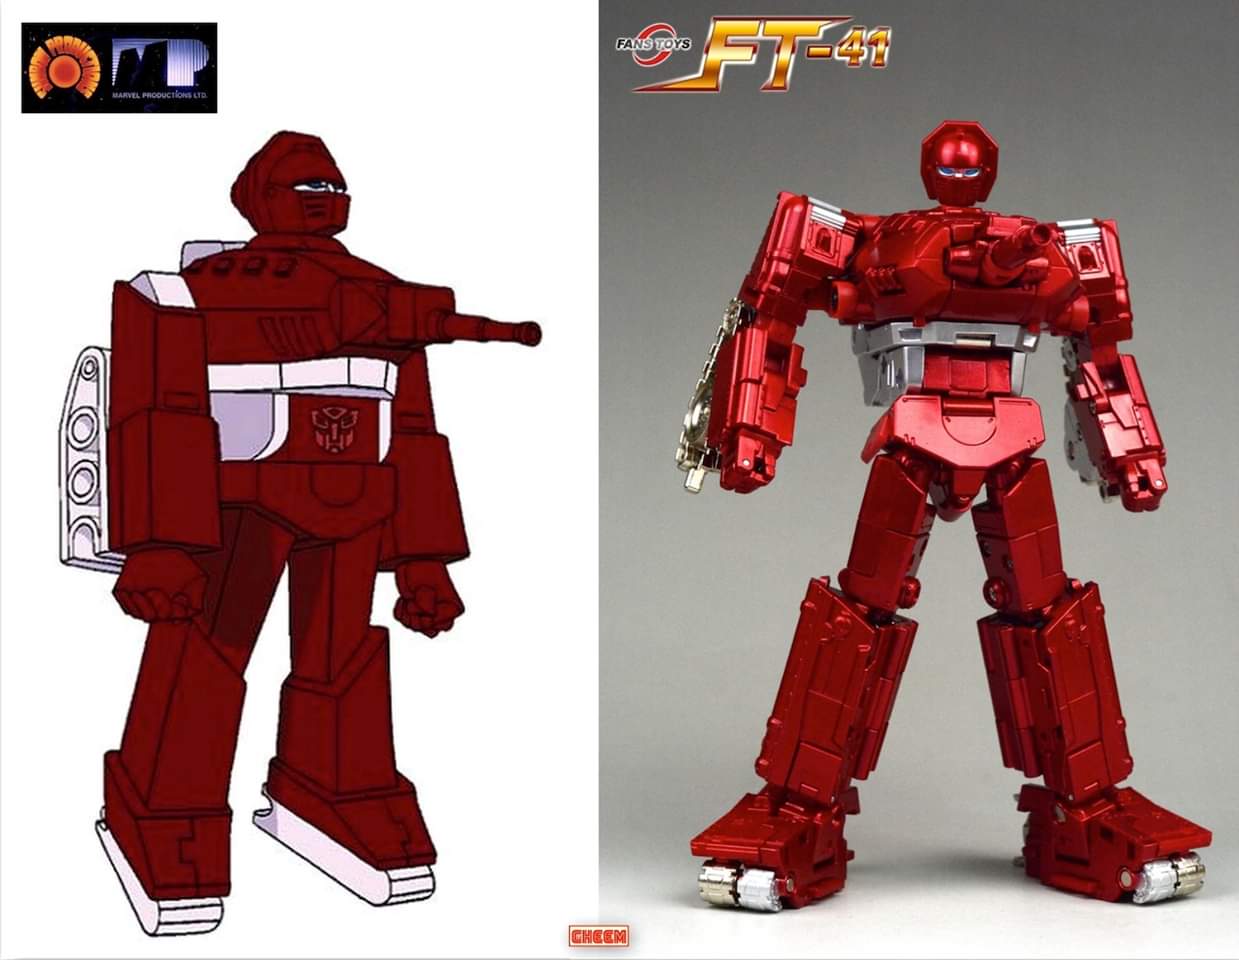 [Fanstoys] Produit Tiers - Minibots MP - Gamme FT - Page 2 I4AyGeZE_o